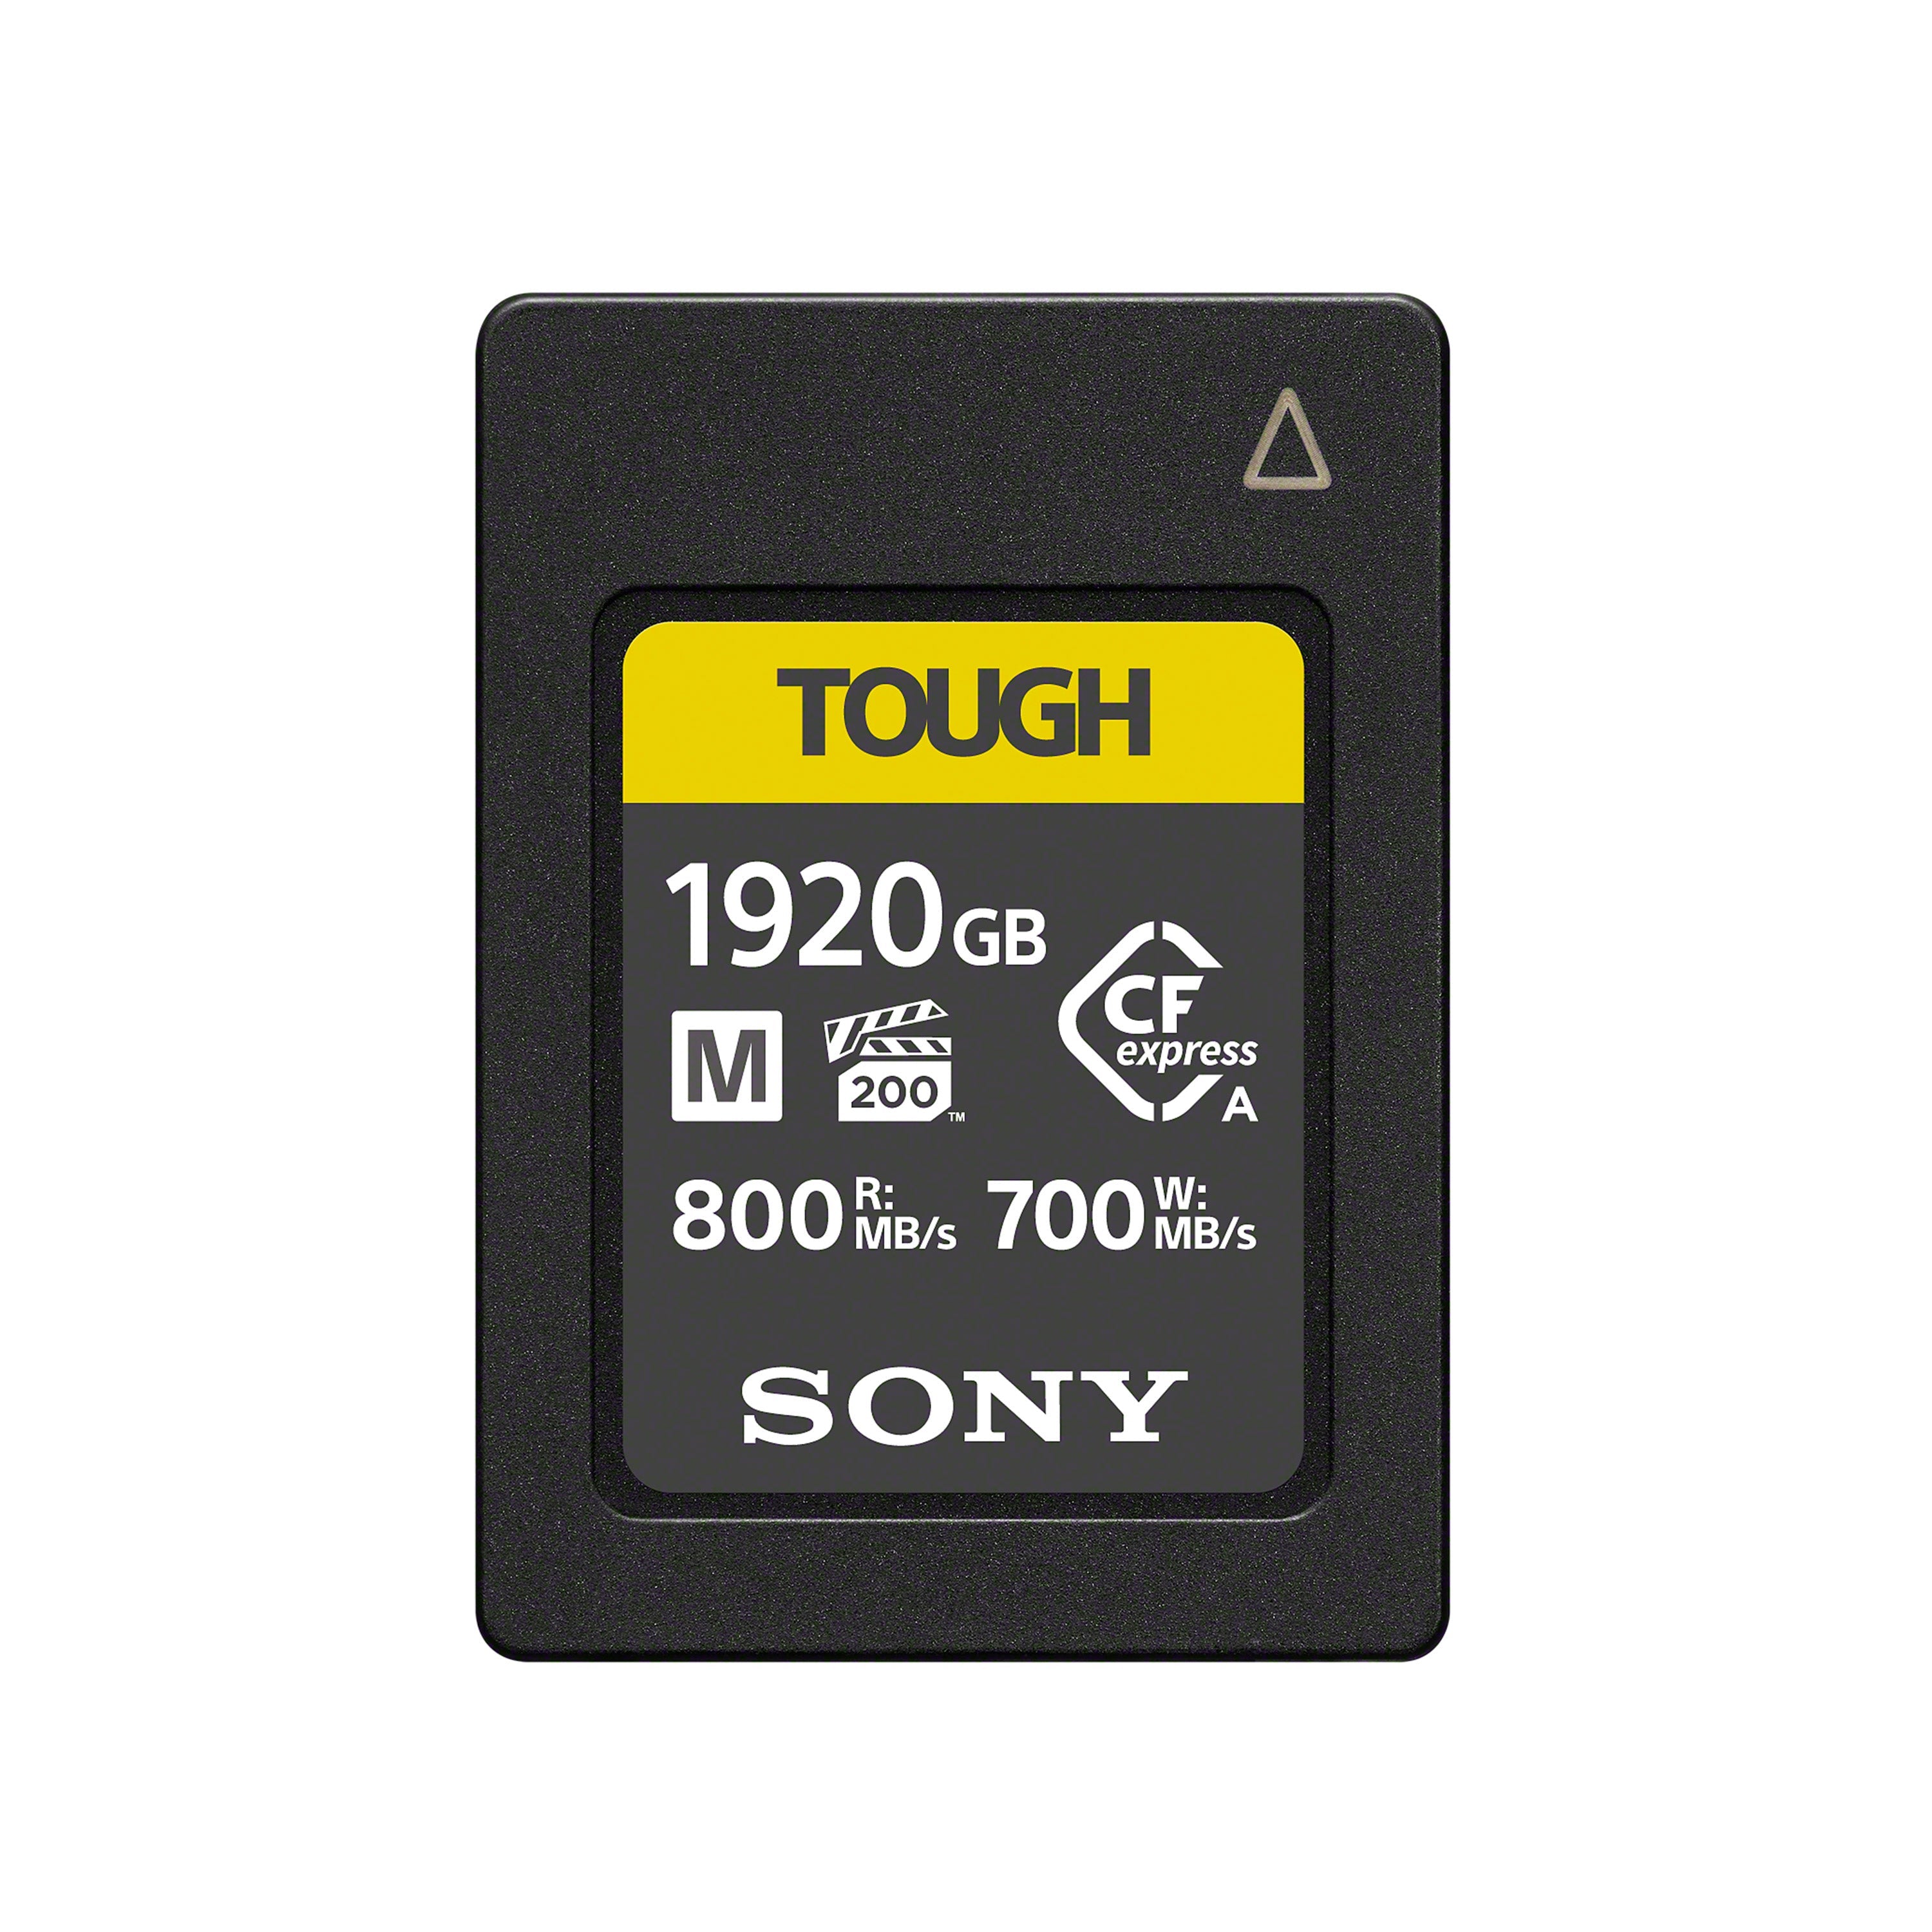 Sony CFexpress Type A M-Series Memory Card